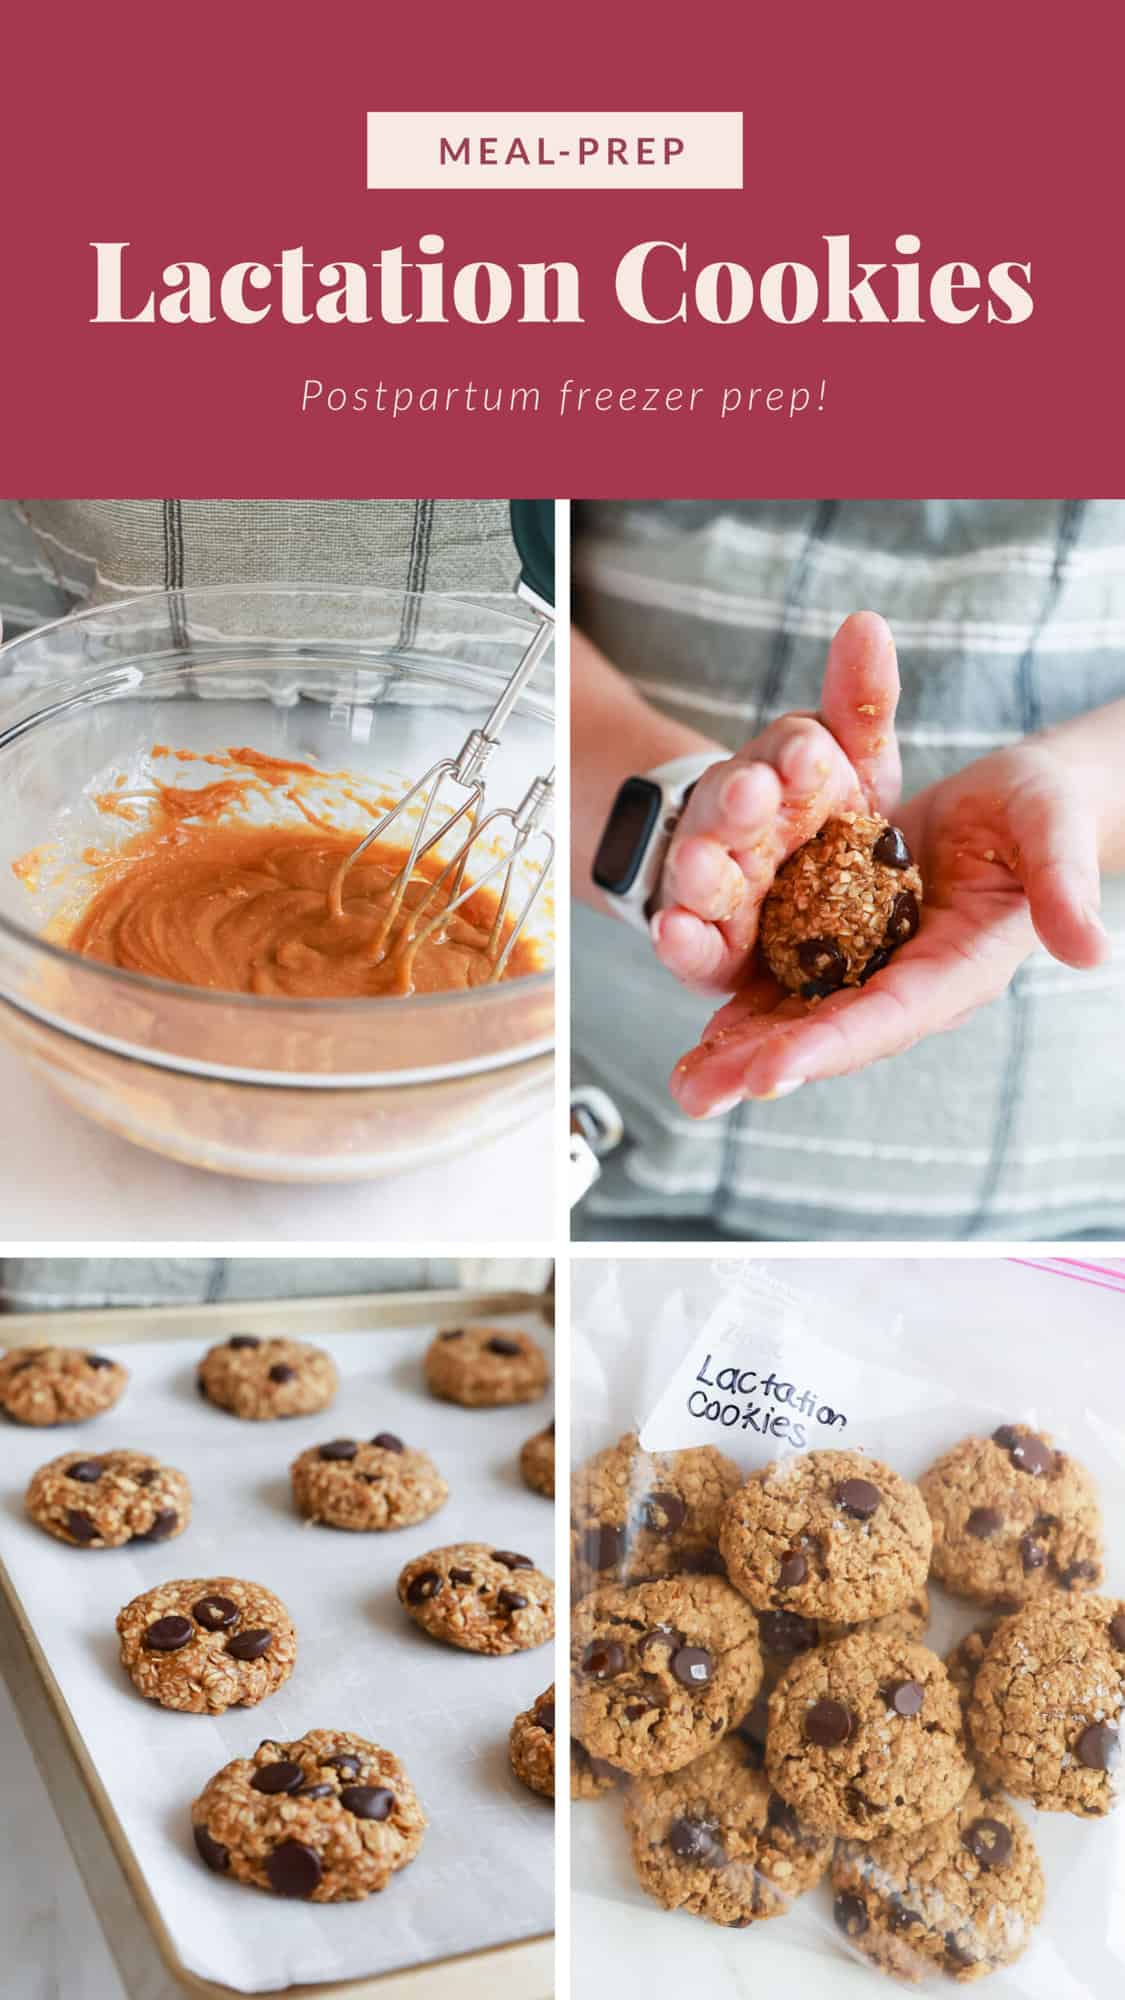 A picture of a recipe for lactation cookies.